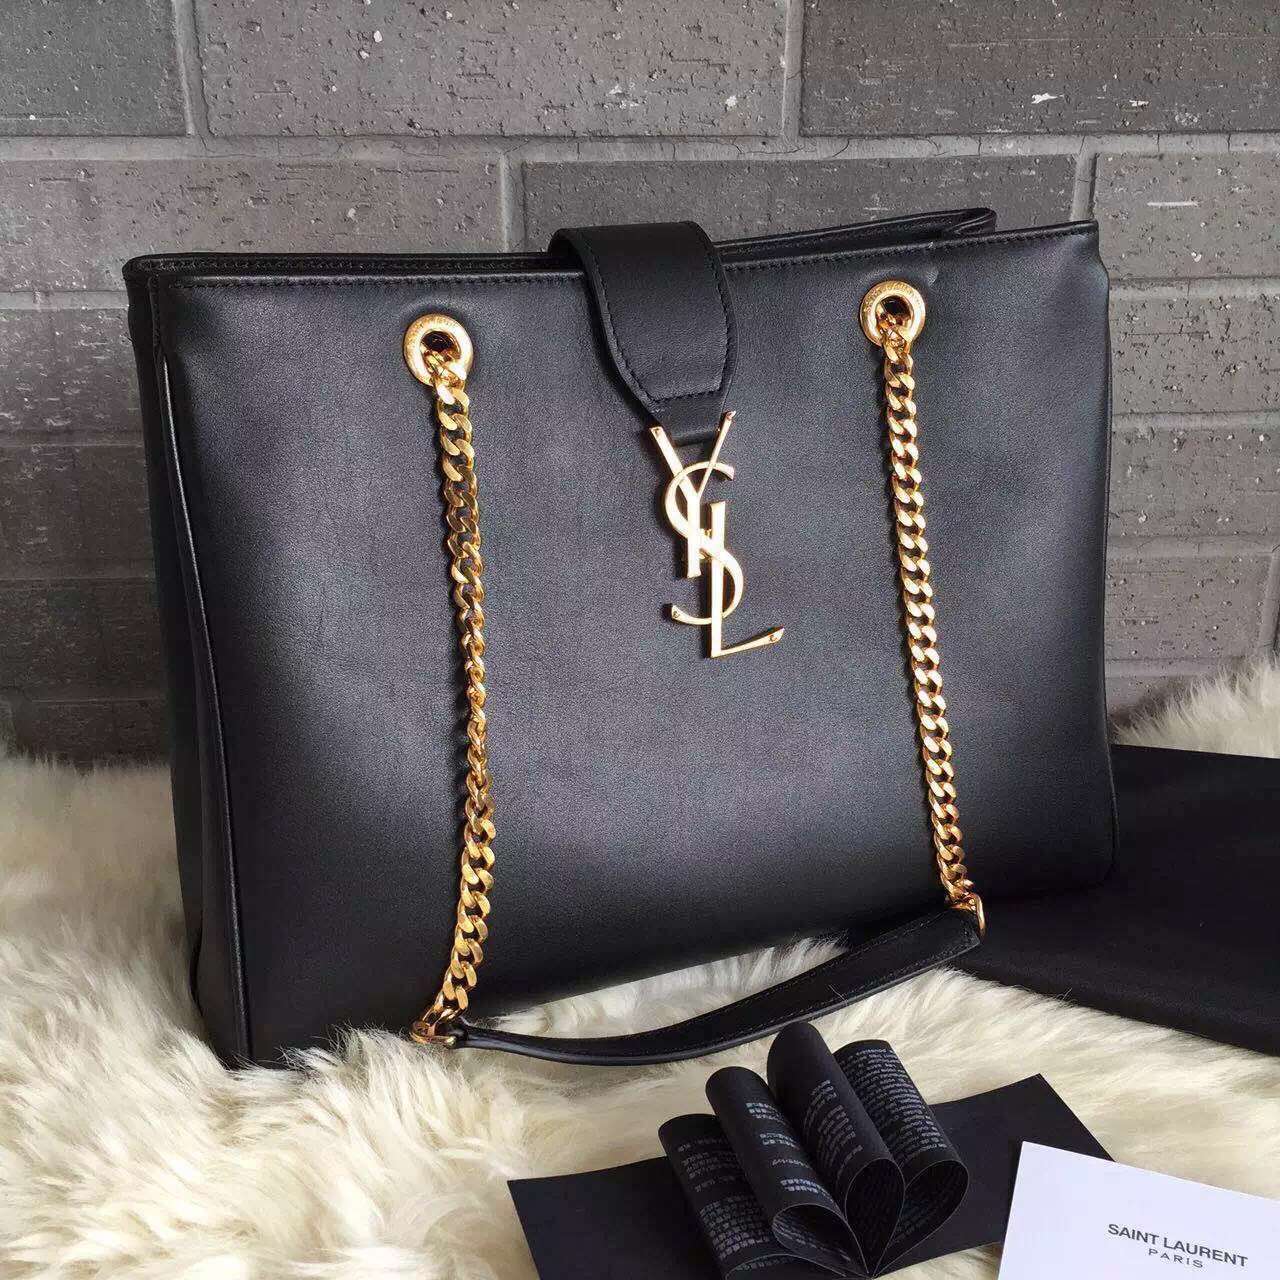 2015 New Saint Laurent Bag Cheap Sale-Saint Laurent Classic Monogram Shopping Bag in Black Smooth Calfskin Leather with Gold Chain - Click Image to Close